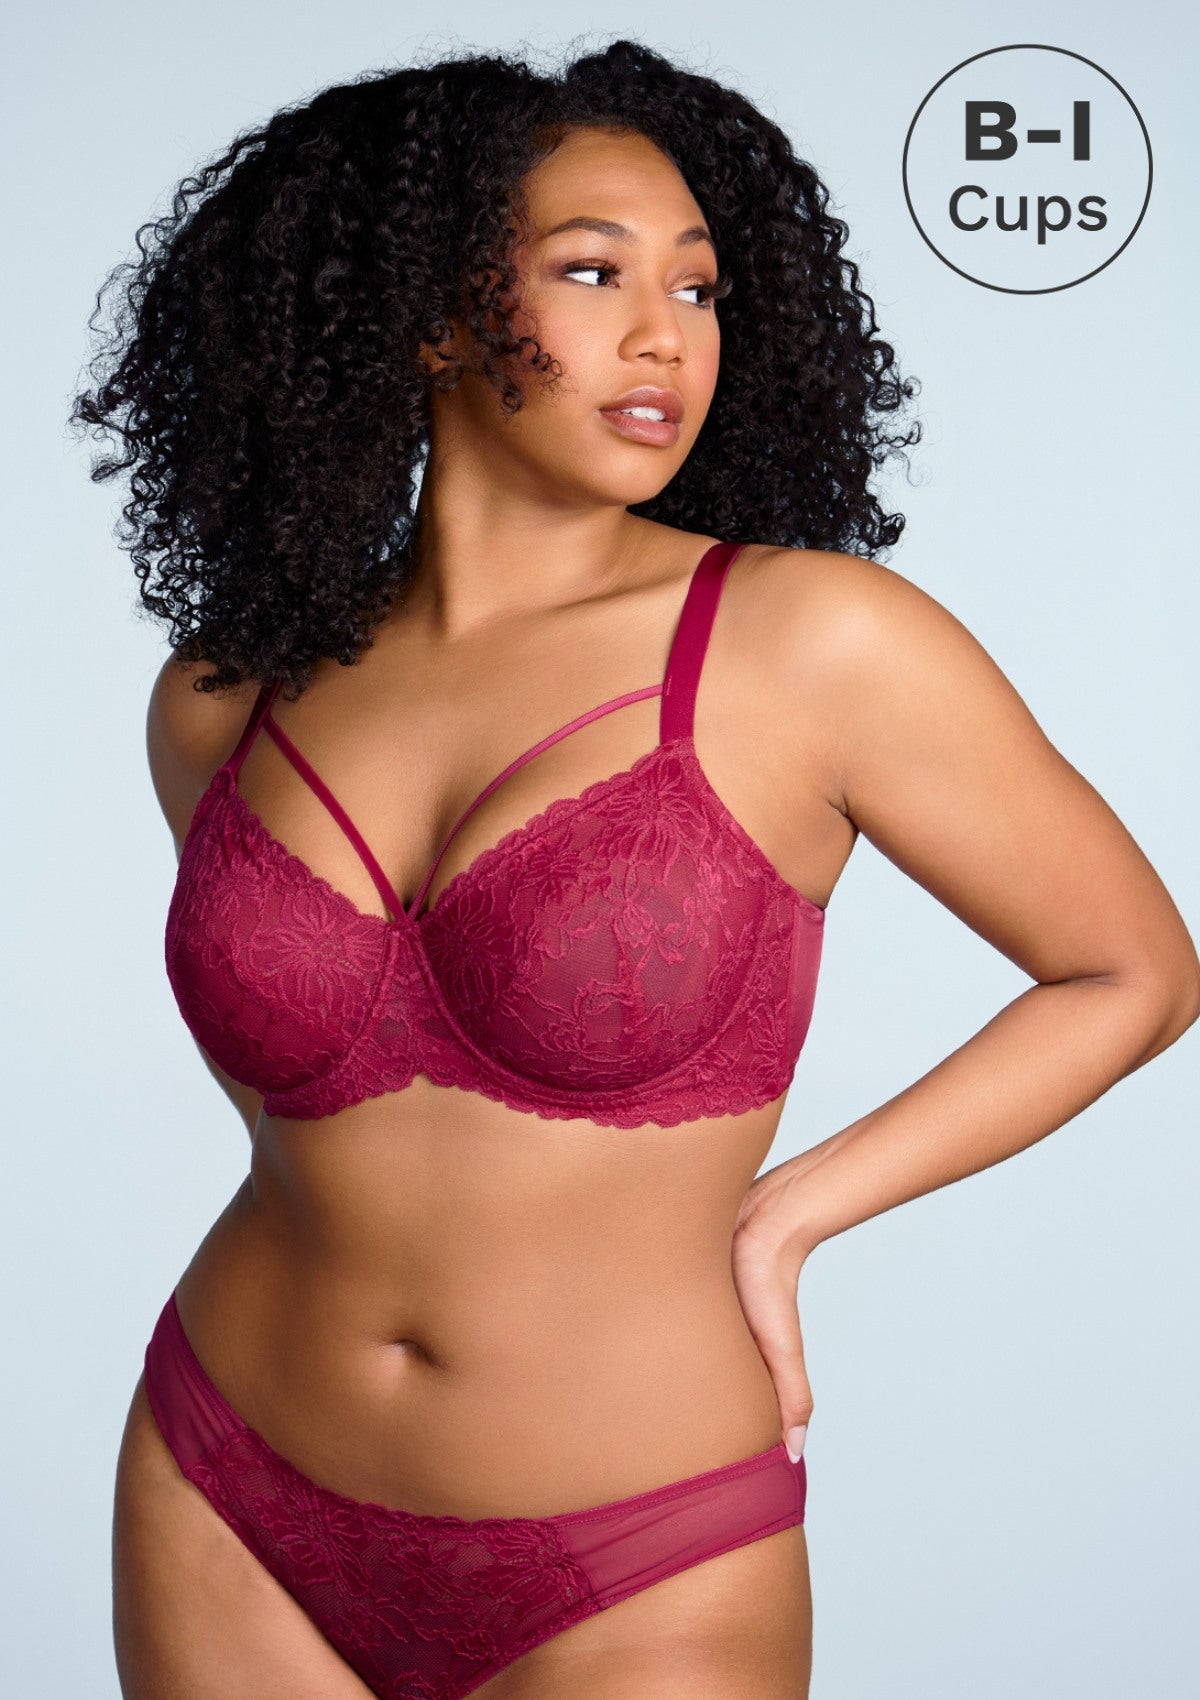 HSIA Pretty In Petals Sexy Lace Bra: Full Coverage Back Smoothing Bra - Red / 34 / C